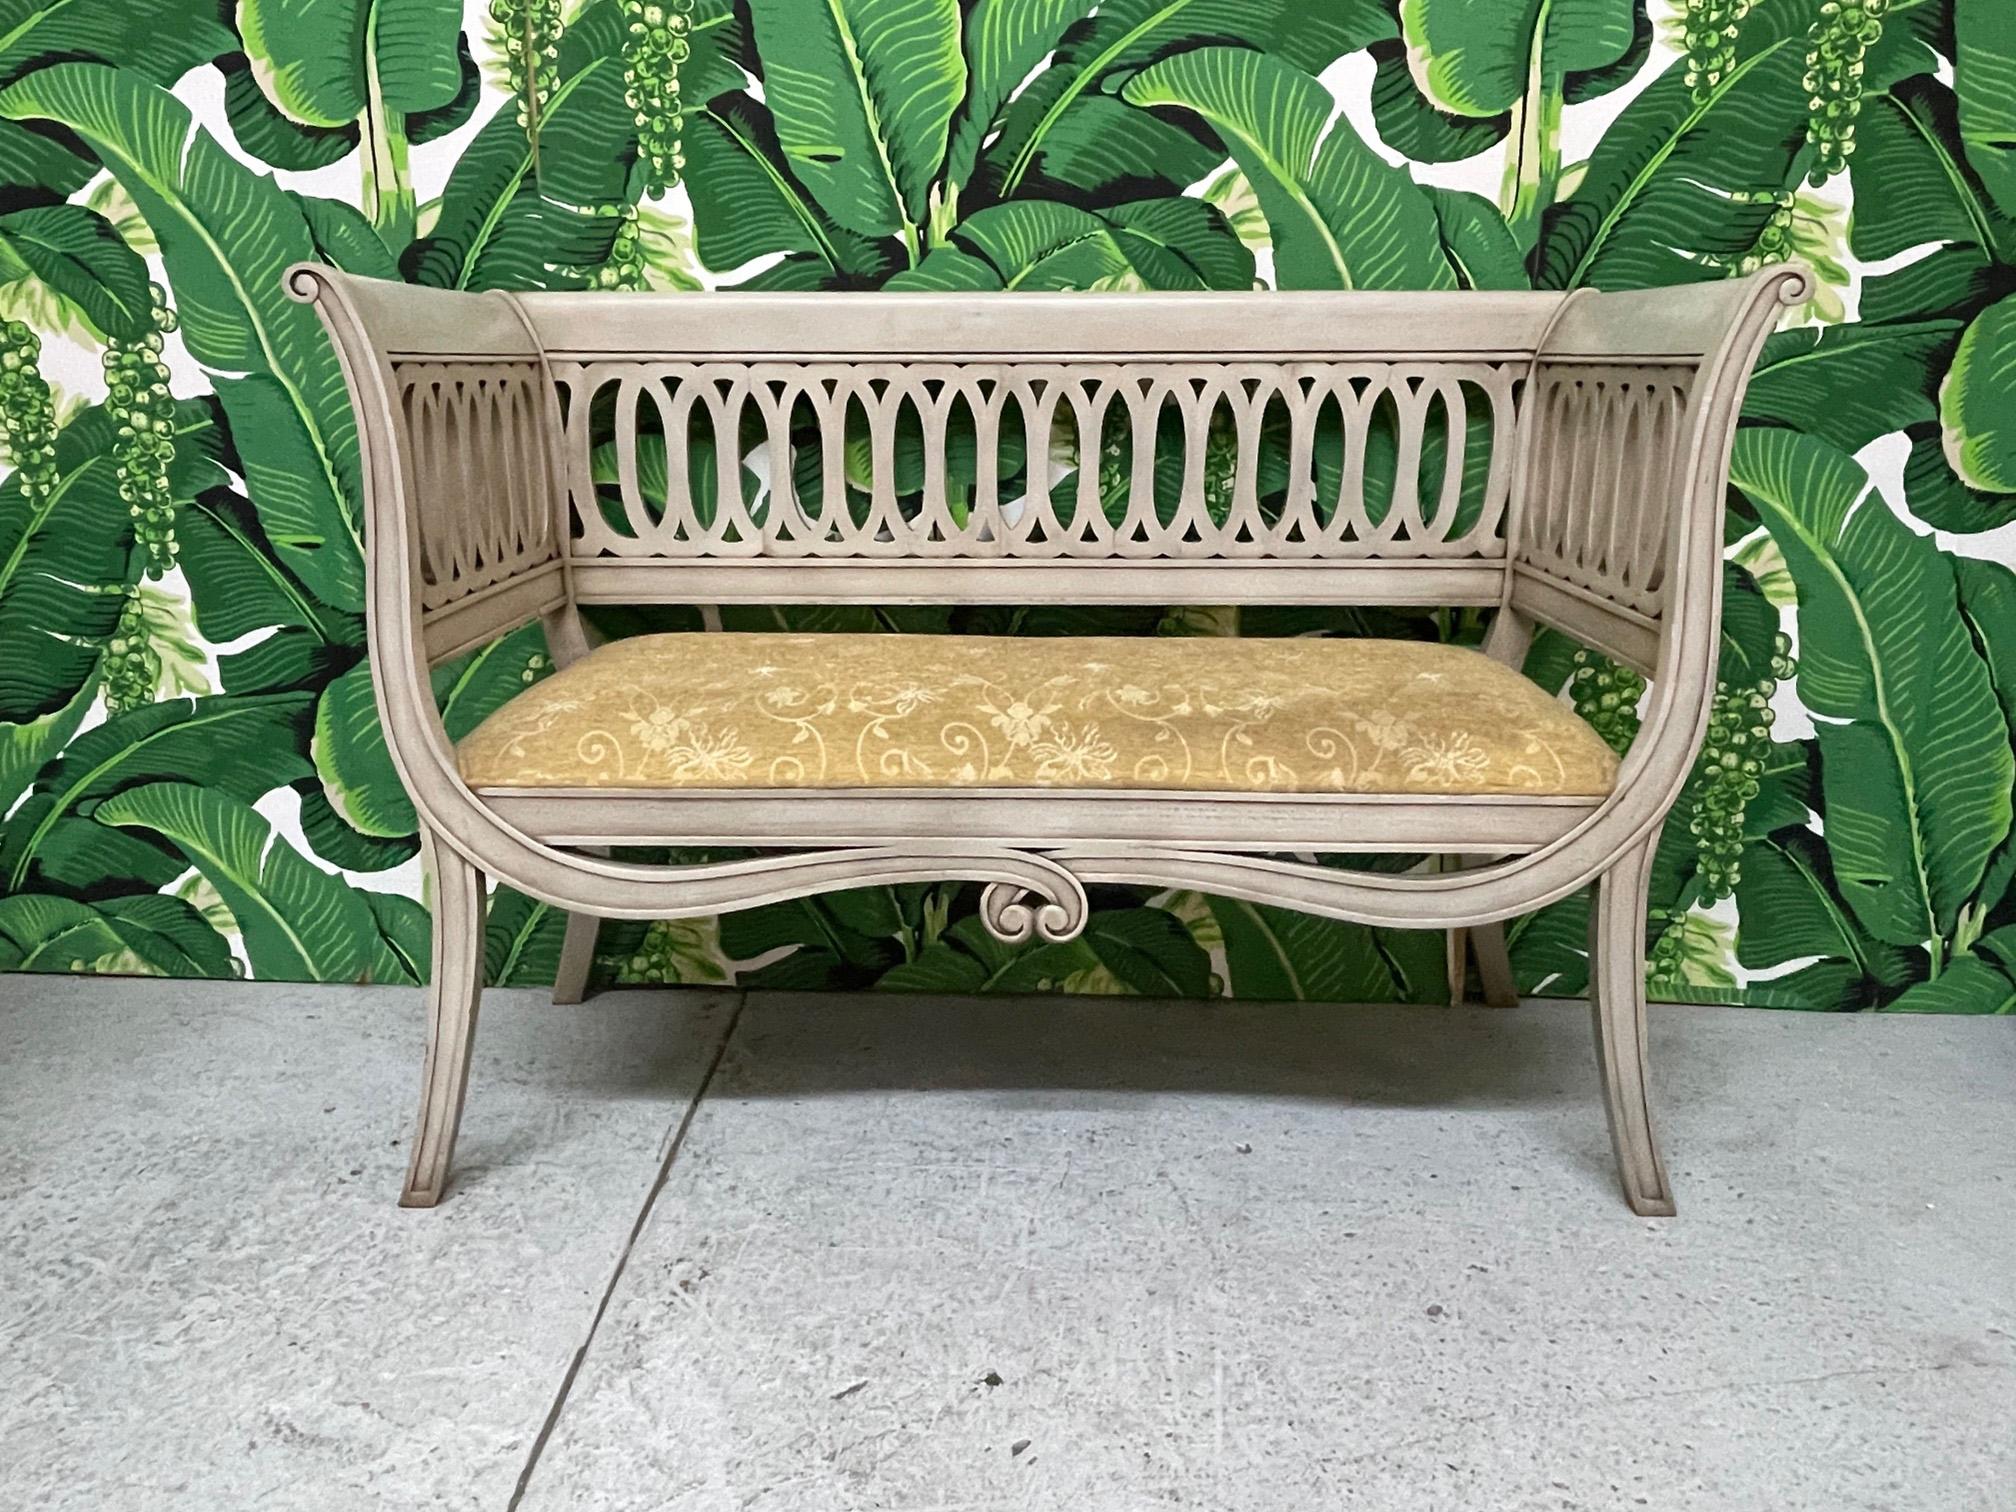 Regency style bench features a scrolled frame and sabre legs. Upholstered in a vintage tone on tone fabric. Finish appears to be original. Good condition with imperfections consistent with age. May exhibit scuffs, marks, or wear, see photos for